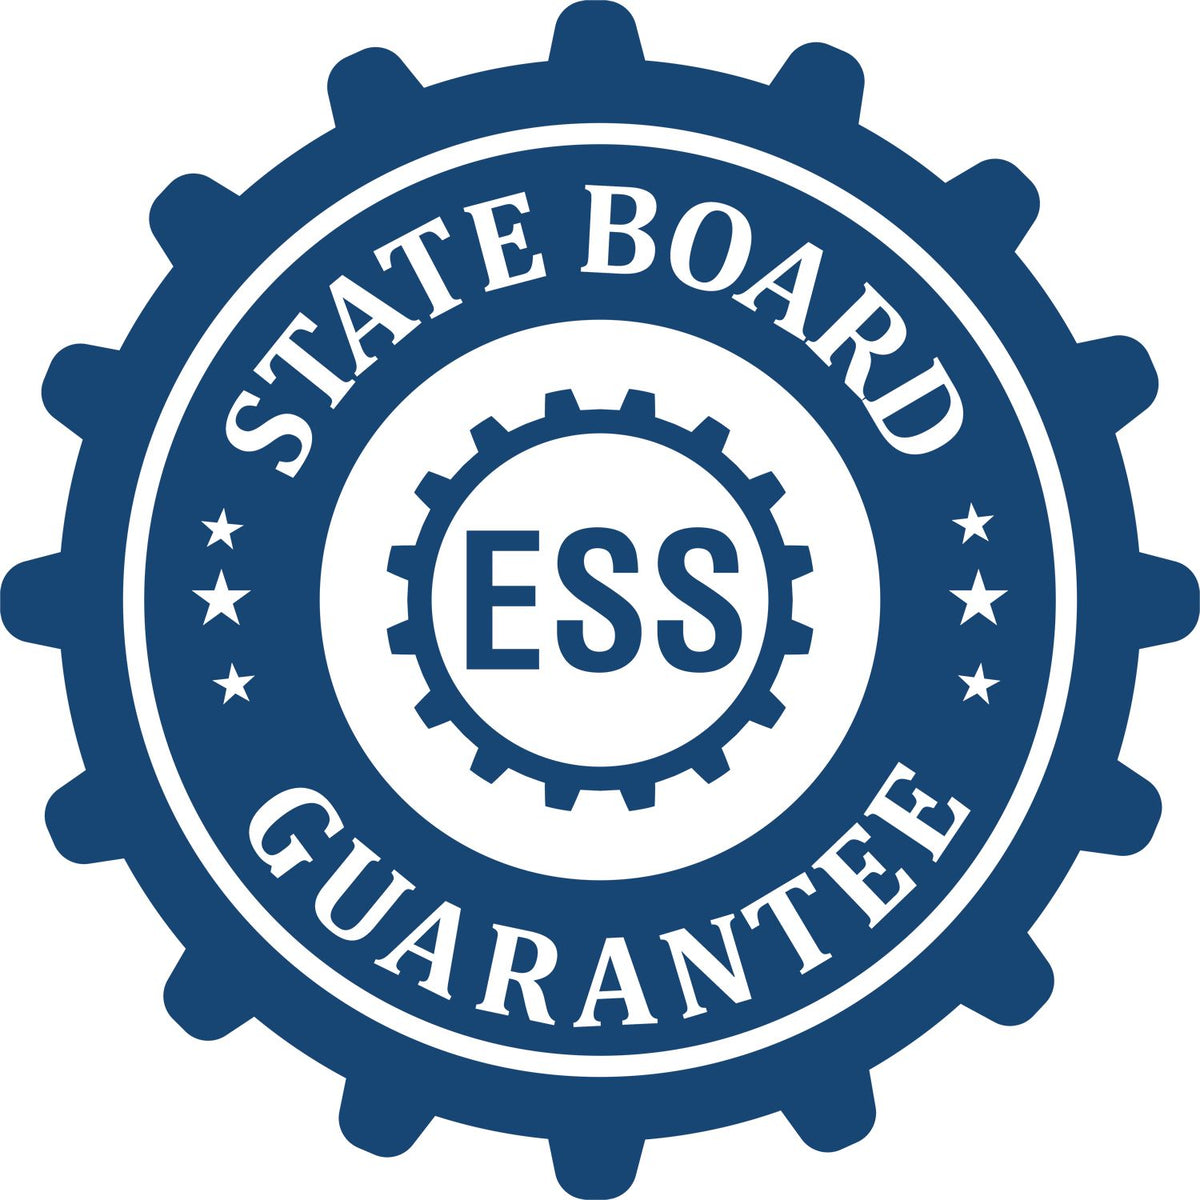 An emblem in a gear shape illustrating a state board guarantee for the Gift Texas Land Surveyor Seal